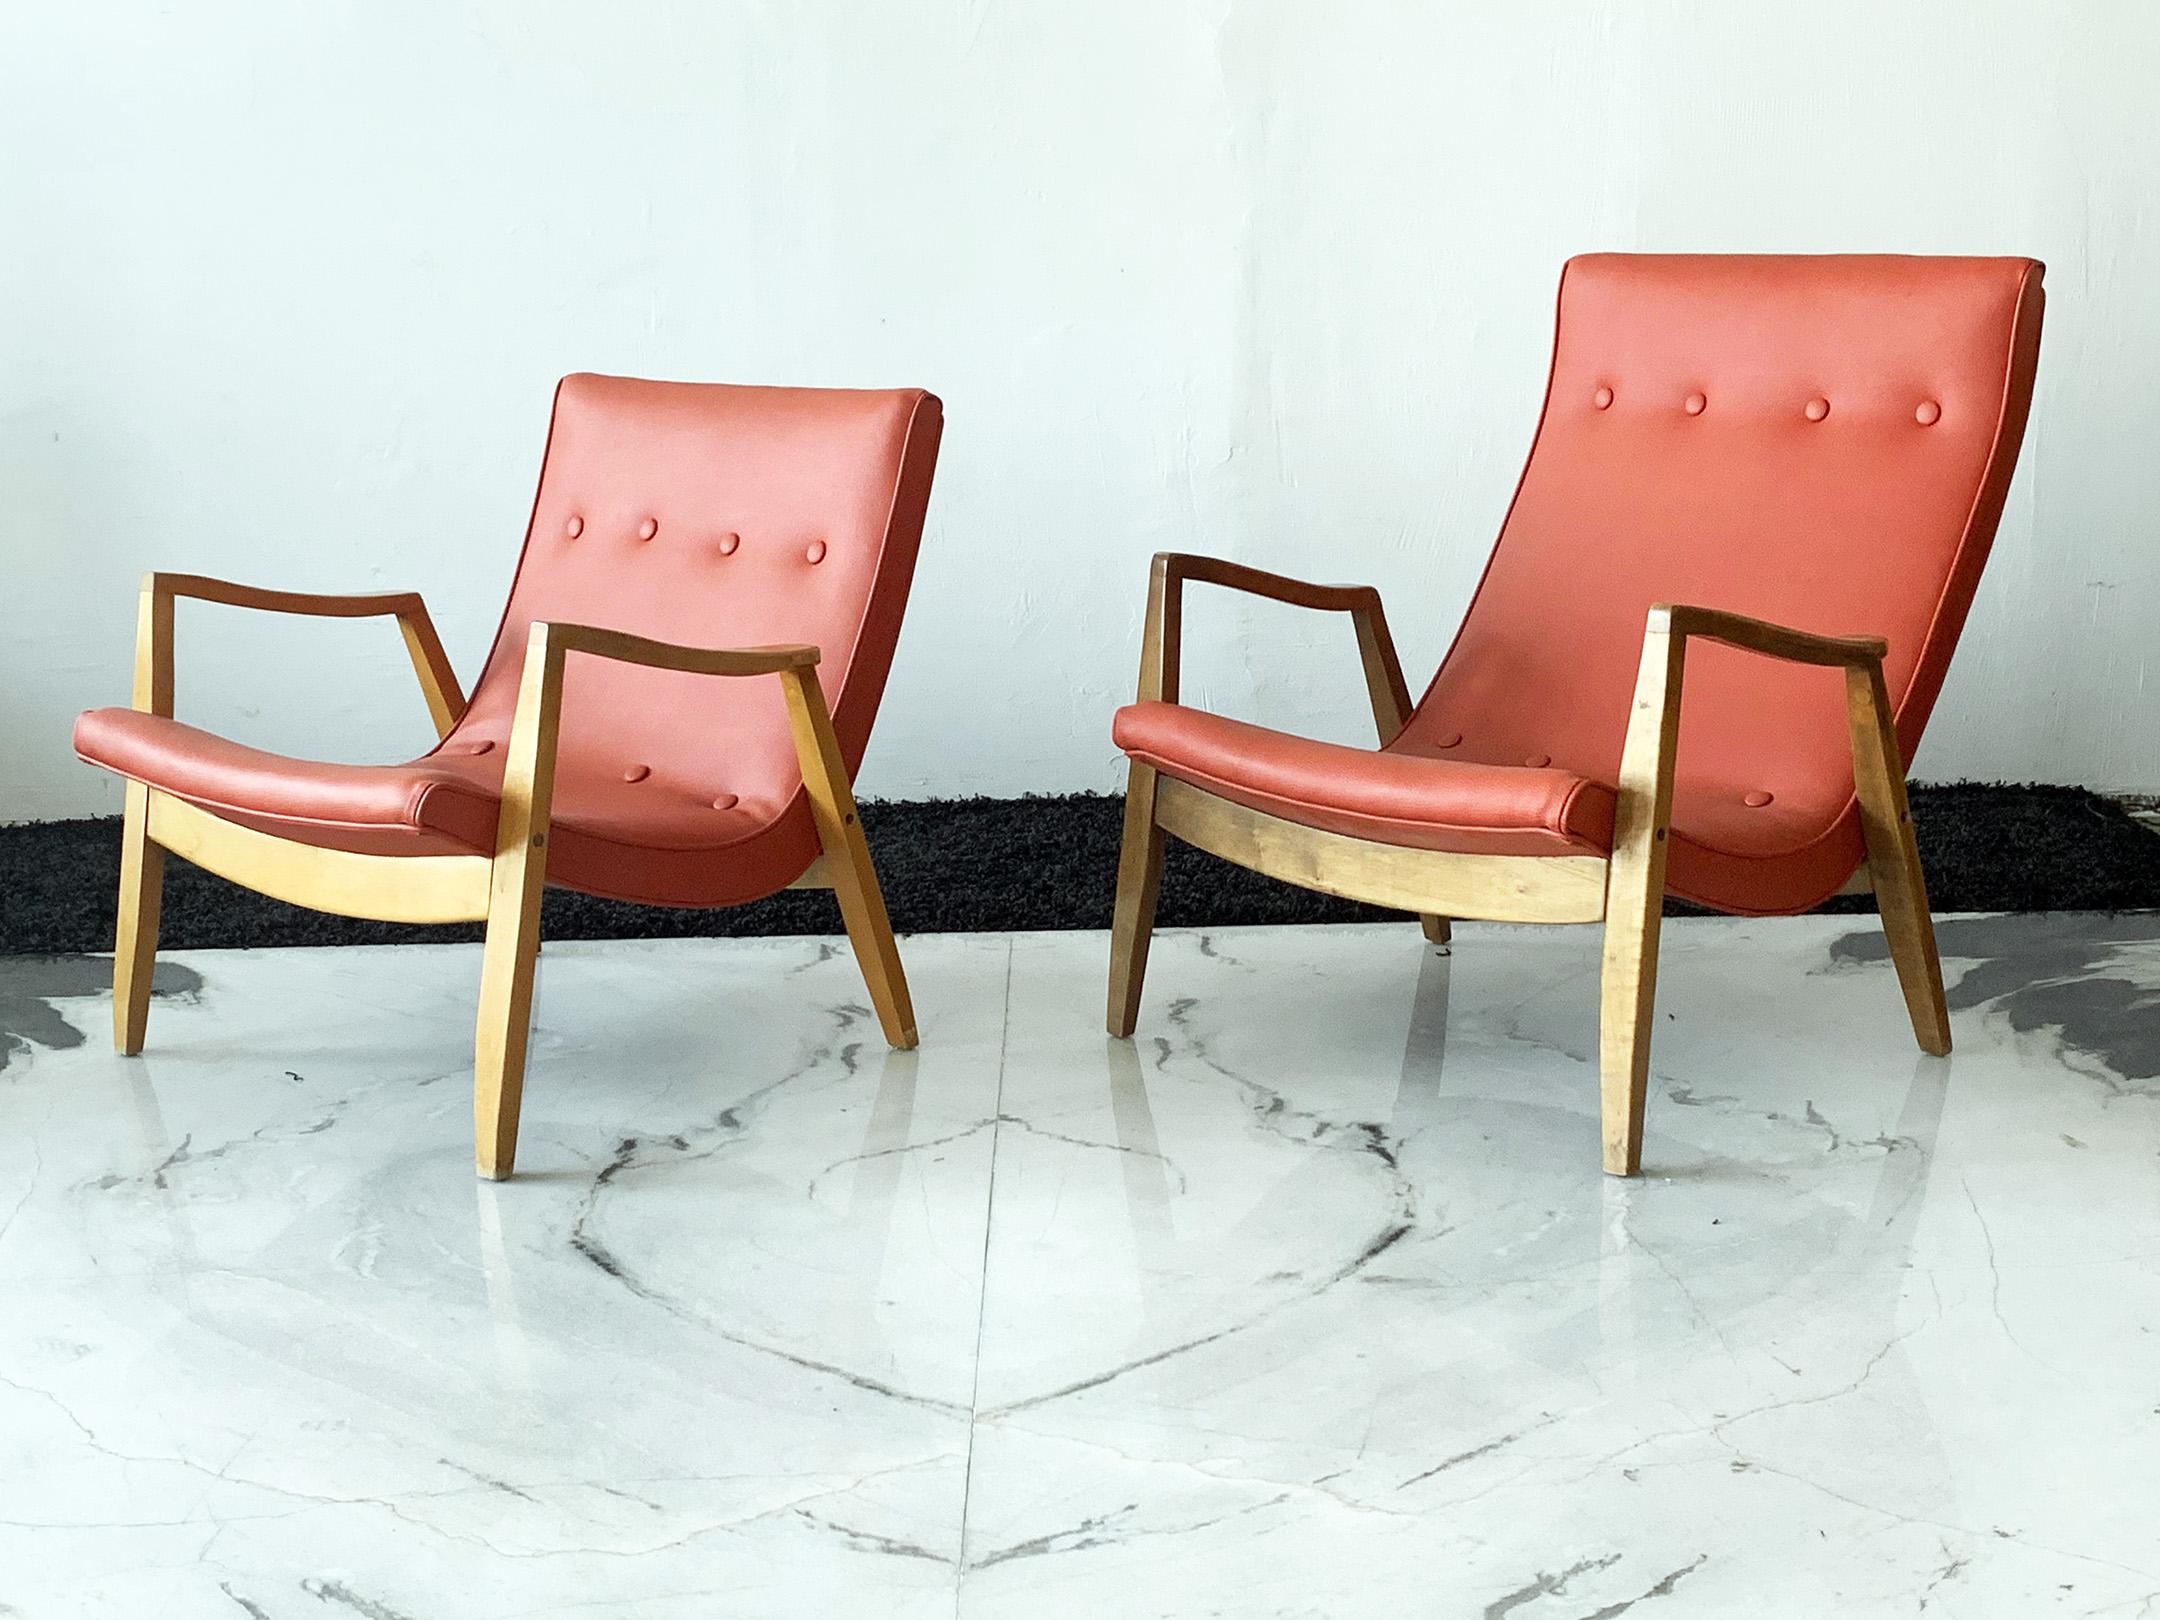 Available right now we have this stunning set of Milo Baughman scoop lounge chairs. The chairs are upholstered in their original coral colored vinyl, and feature solid oak frames and button tufting.

These stunning chairs, designed by Milo